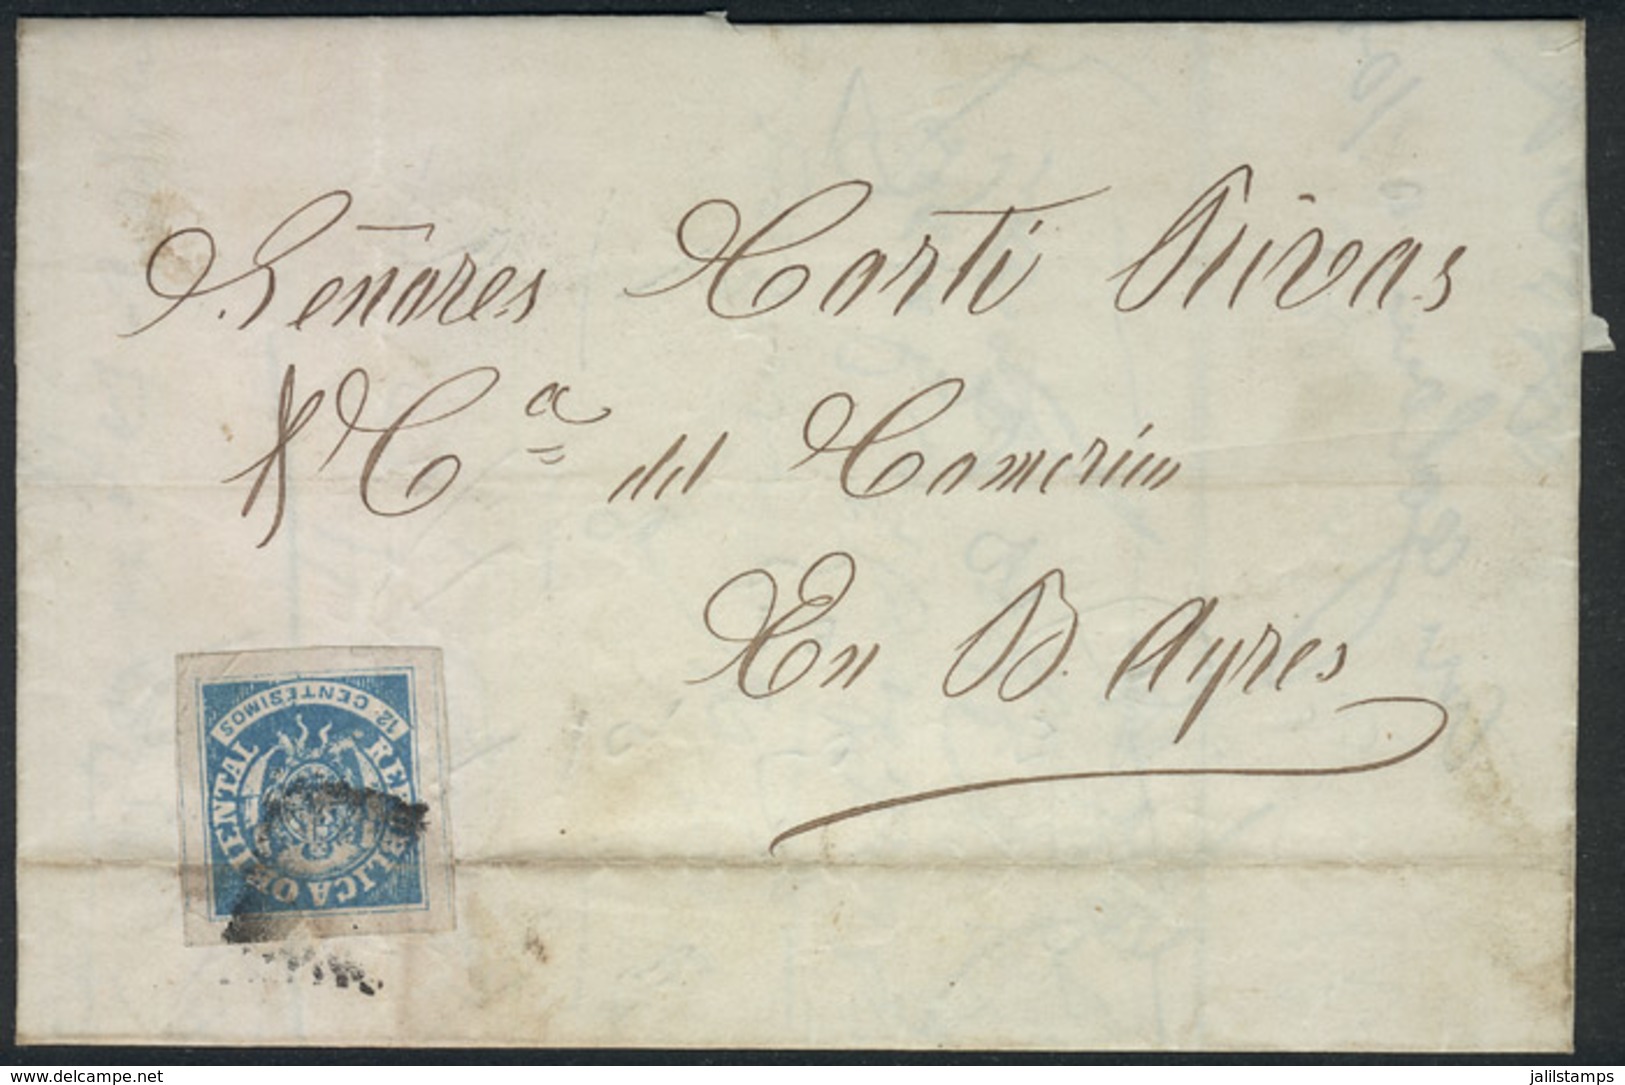 URUGUAY: 17/SEP/1865 MONTEVIDEO - Buenos Aires: Dated Folded Cover, Franked By Sc.23 (Seal 12c. Blue) With Little Defect - Uruguay